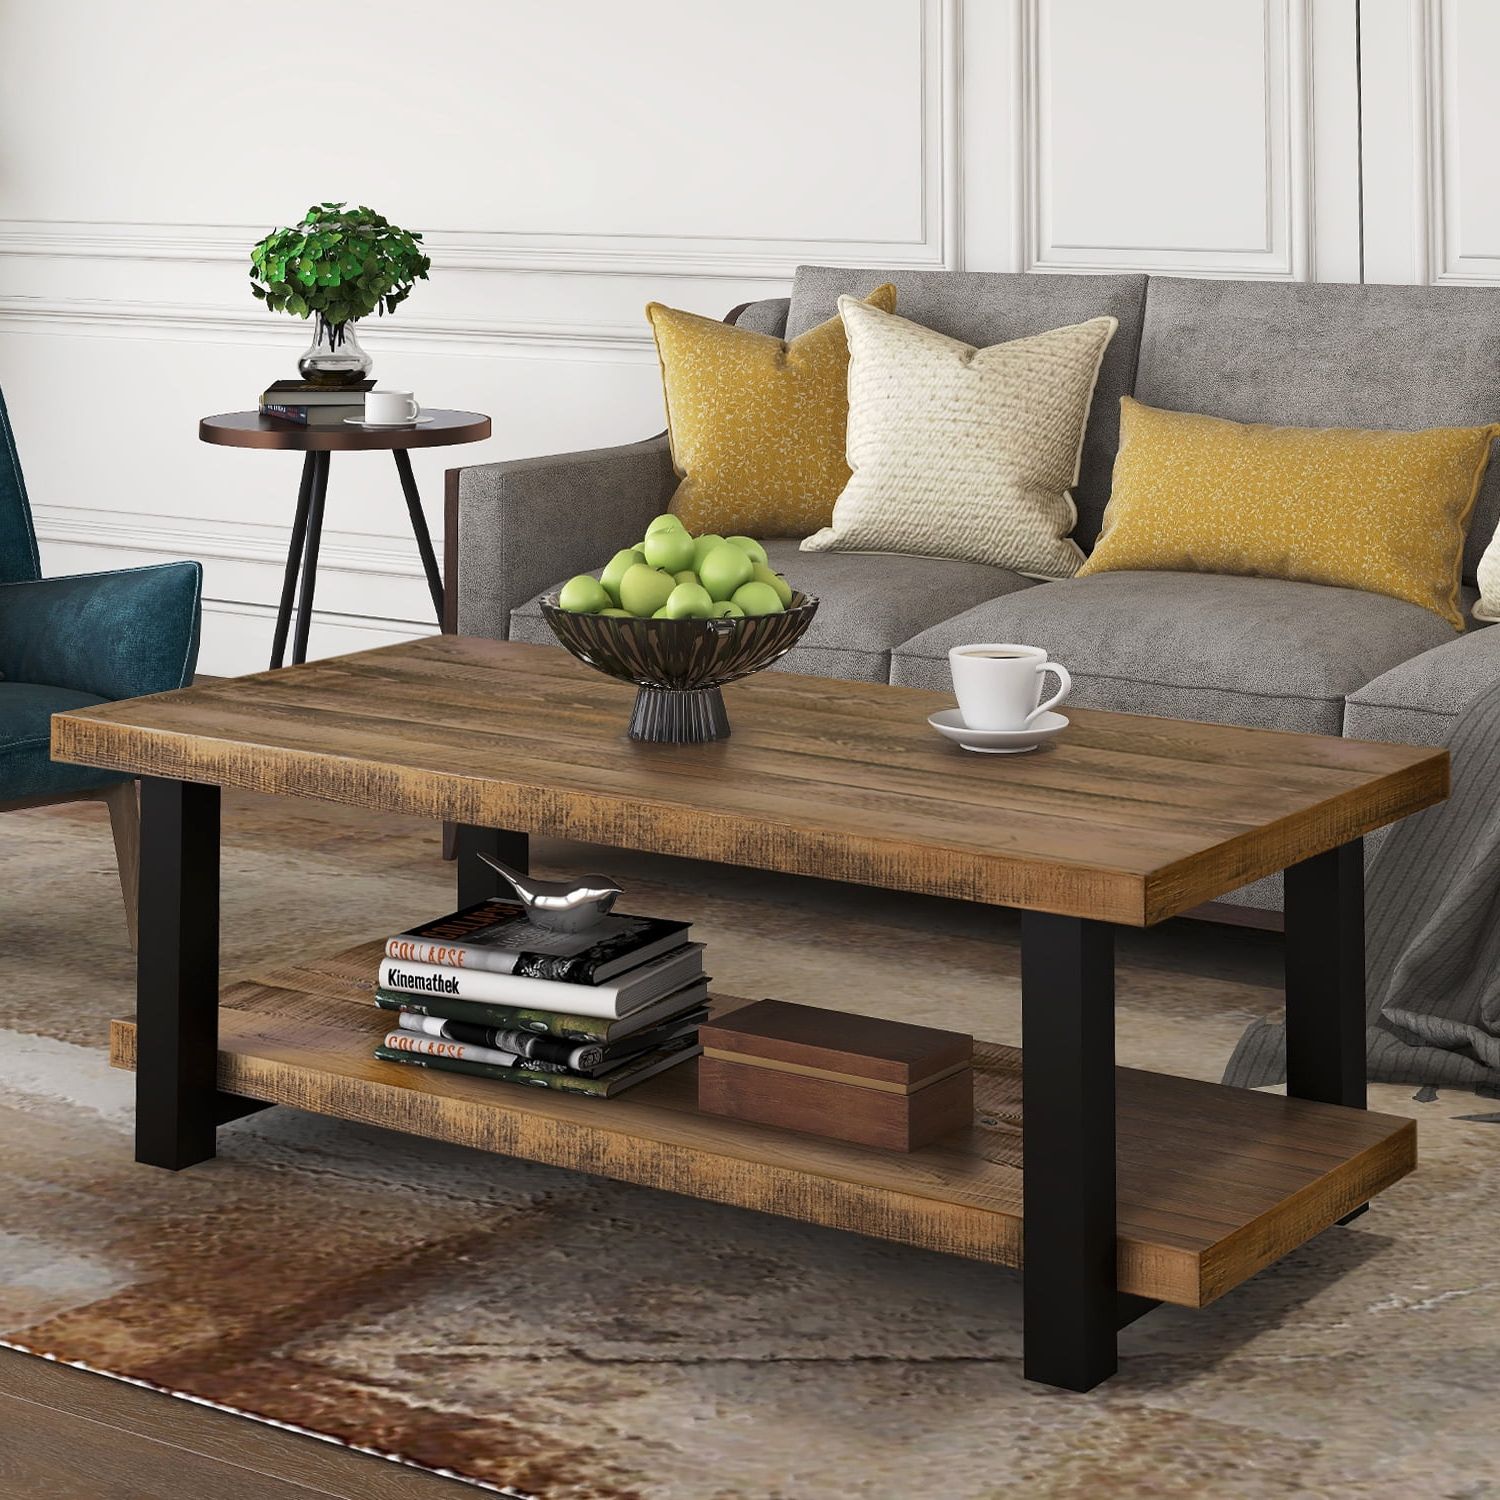 Topcobe Rustic Natural Coffee Table With Storage Shelf, Side End Table Within Rustic Wood Coffee Tables (Gallery 3 of 20)